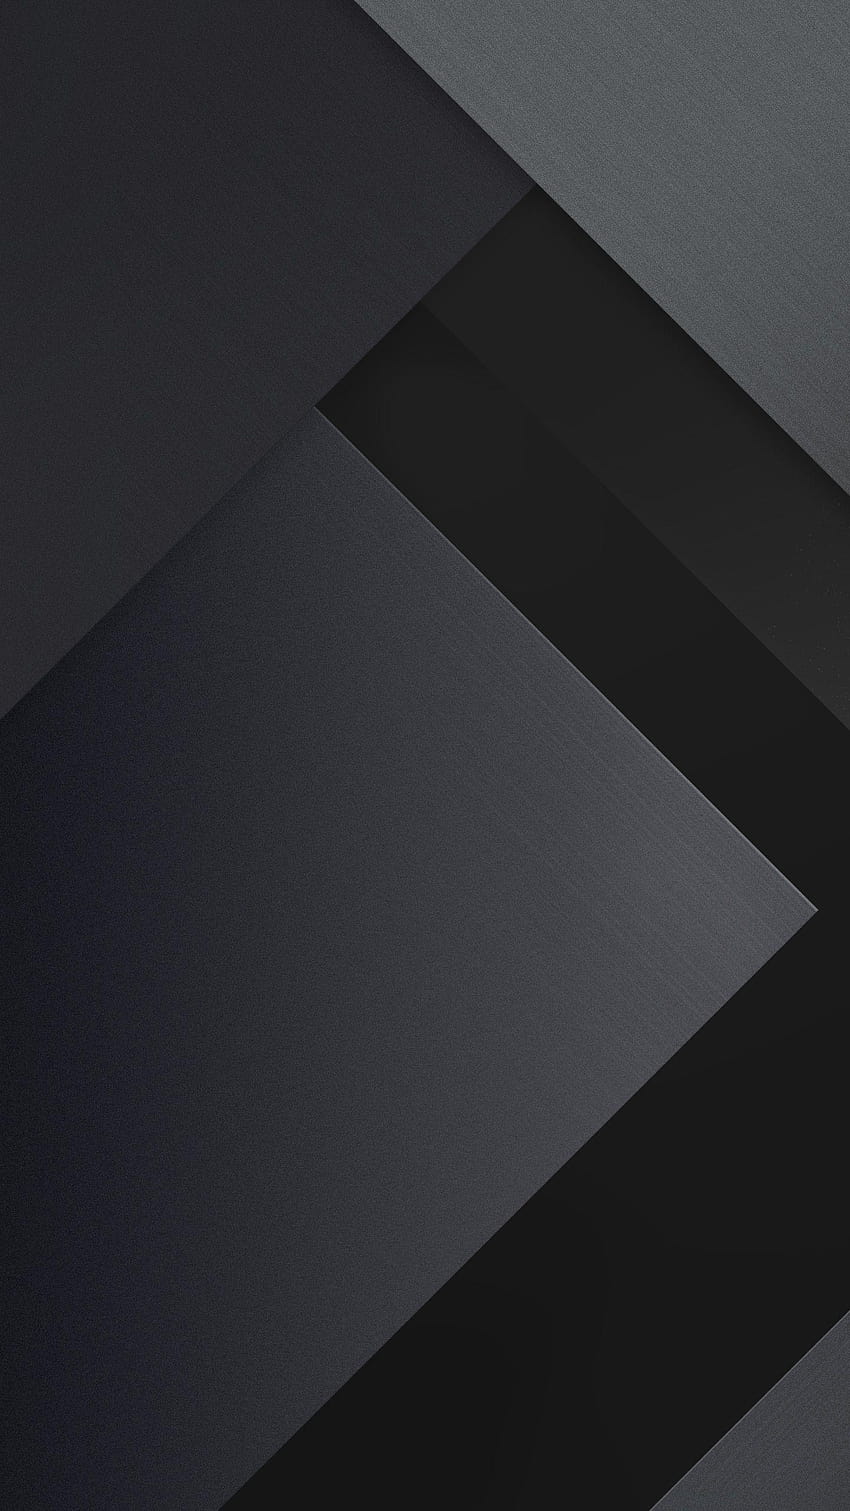 Diagonal Lines 6 for Samsung Galaxy S7 and Edge HD phone wallpaper